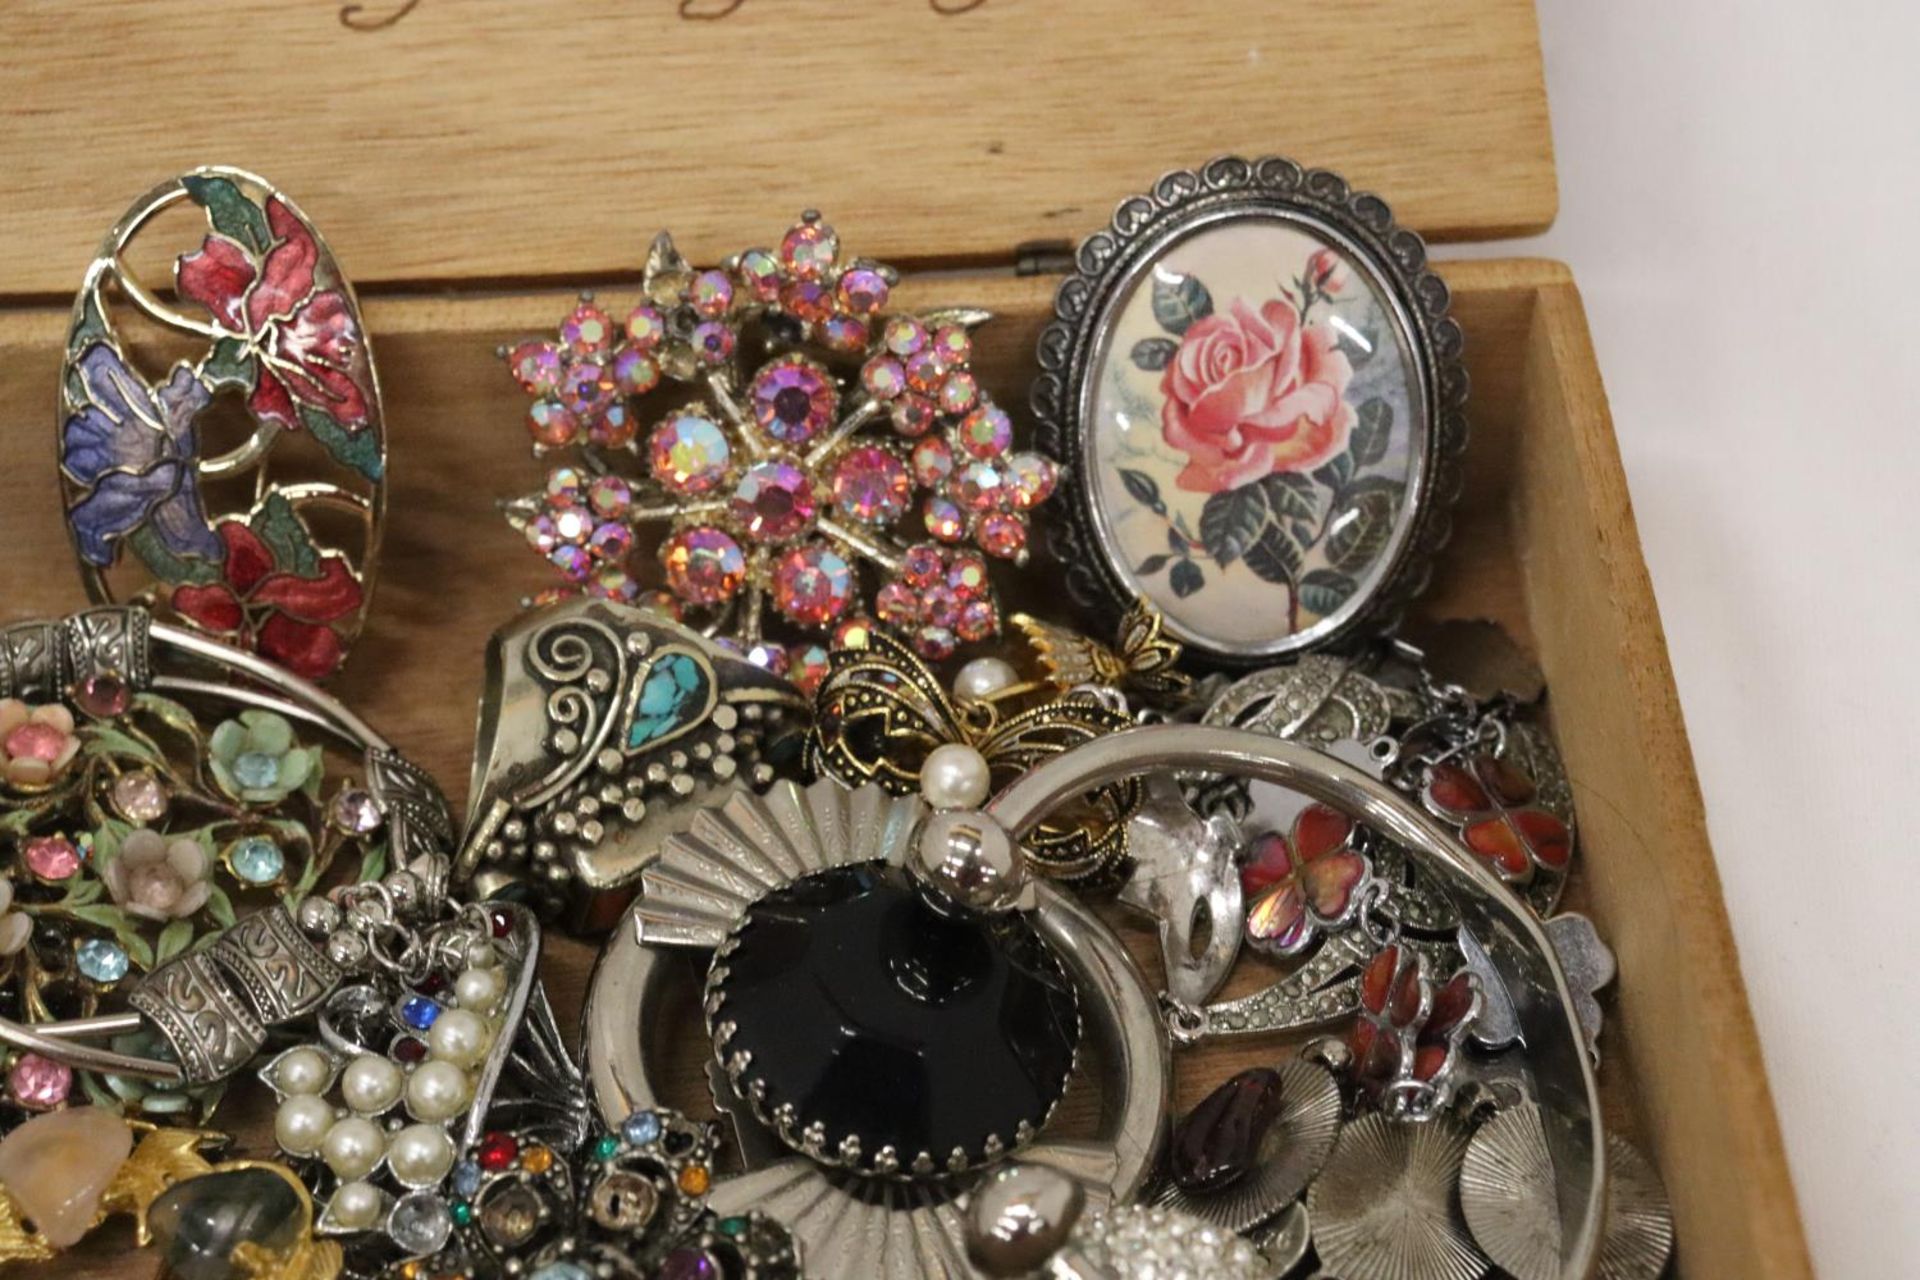 A QUANTITY OF VINTAGE COSTUME JEWELLERY TO INCLUDE RINGS, BROOCHES AND NECKLACES IN A CIGAR BOX - Image 4 of 10